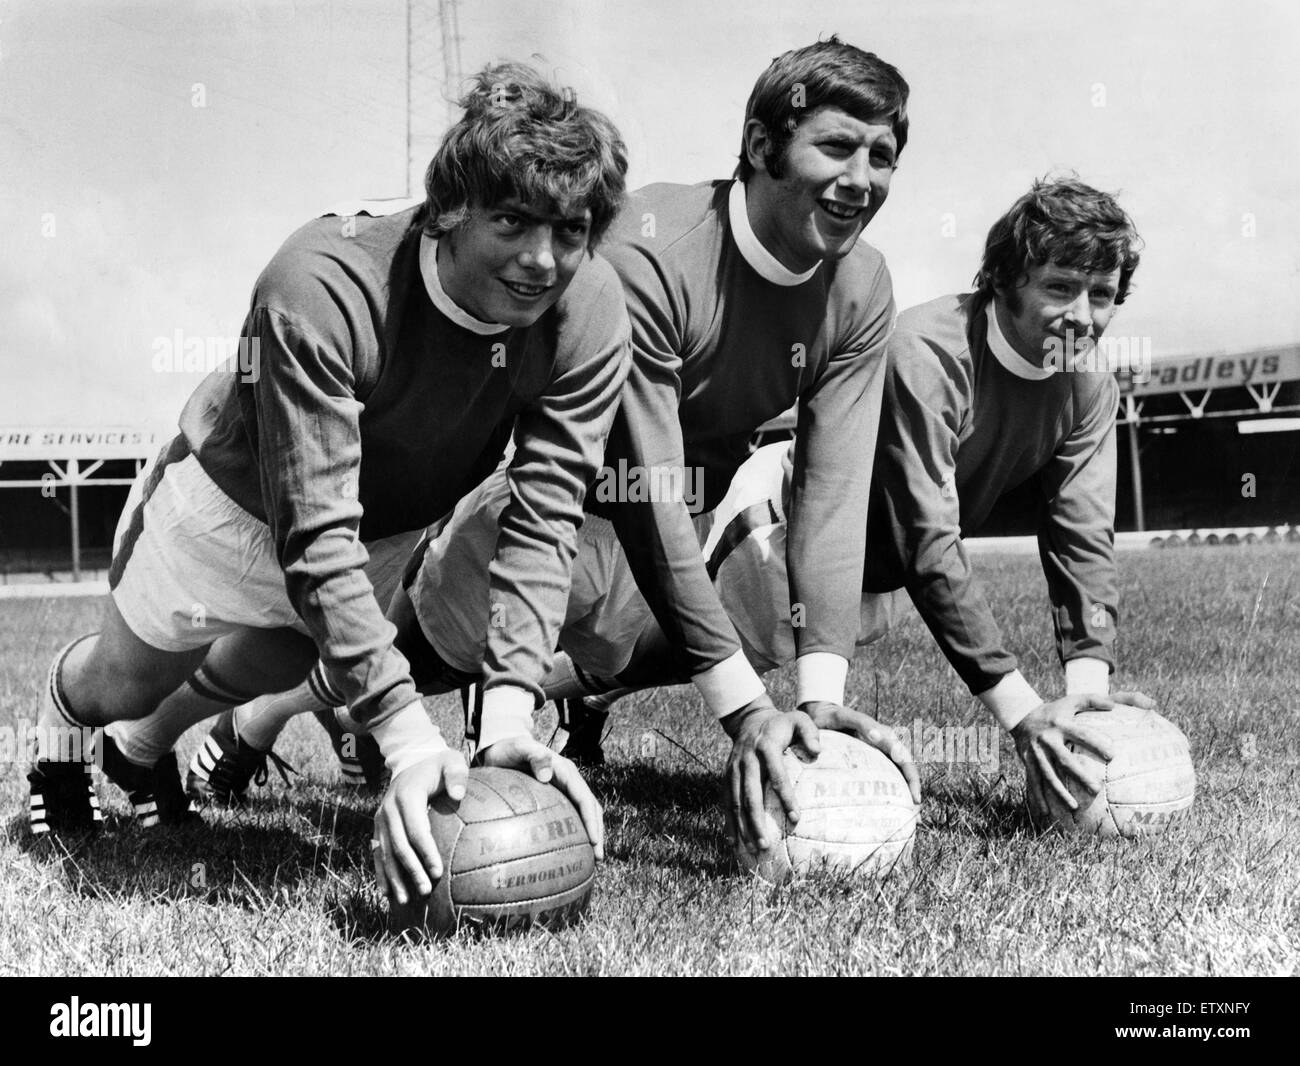 Wrexham F.C's new signings Andy Provan (right) and Tommy Vansittart limber up during a training session with captain Eddie May, before the clubs first season in the league Division III. 24th July 1970. Stock Photo